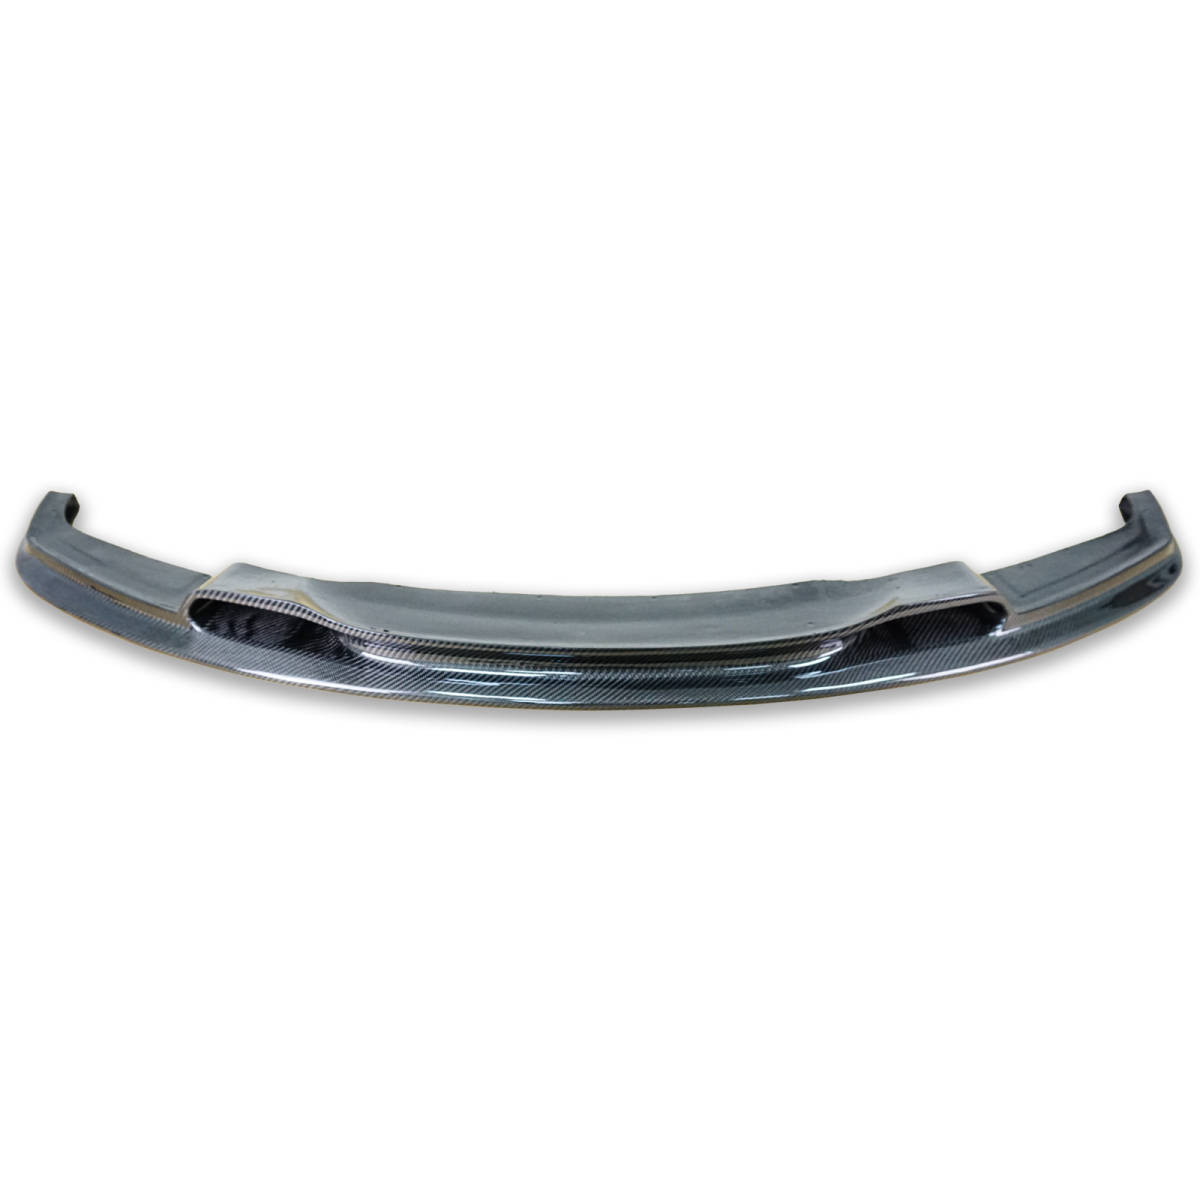  carbon BMW for 3 series F30 F31 M for sport front lip spoiler 2012-2019 VR FL-50806